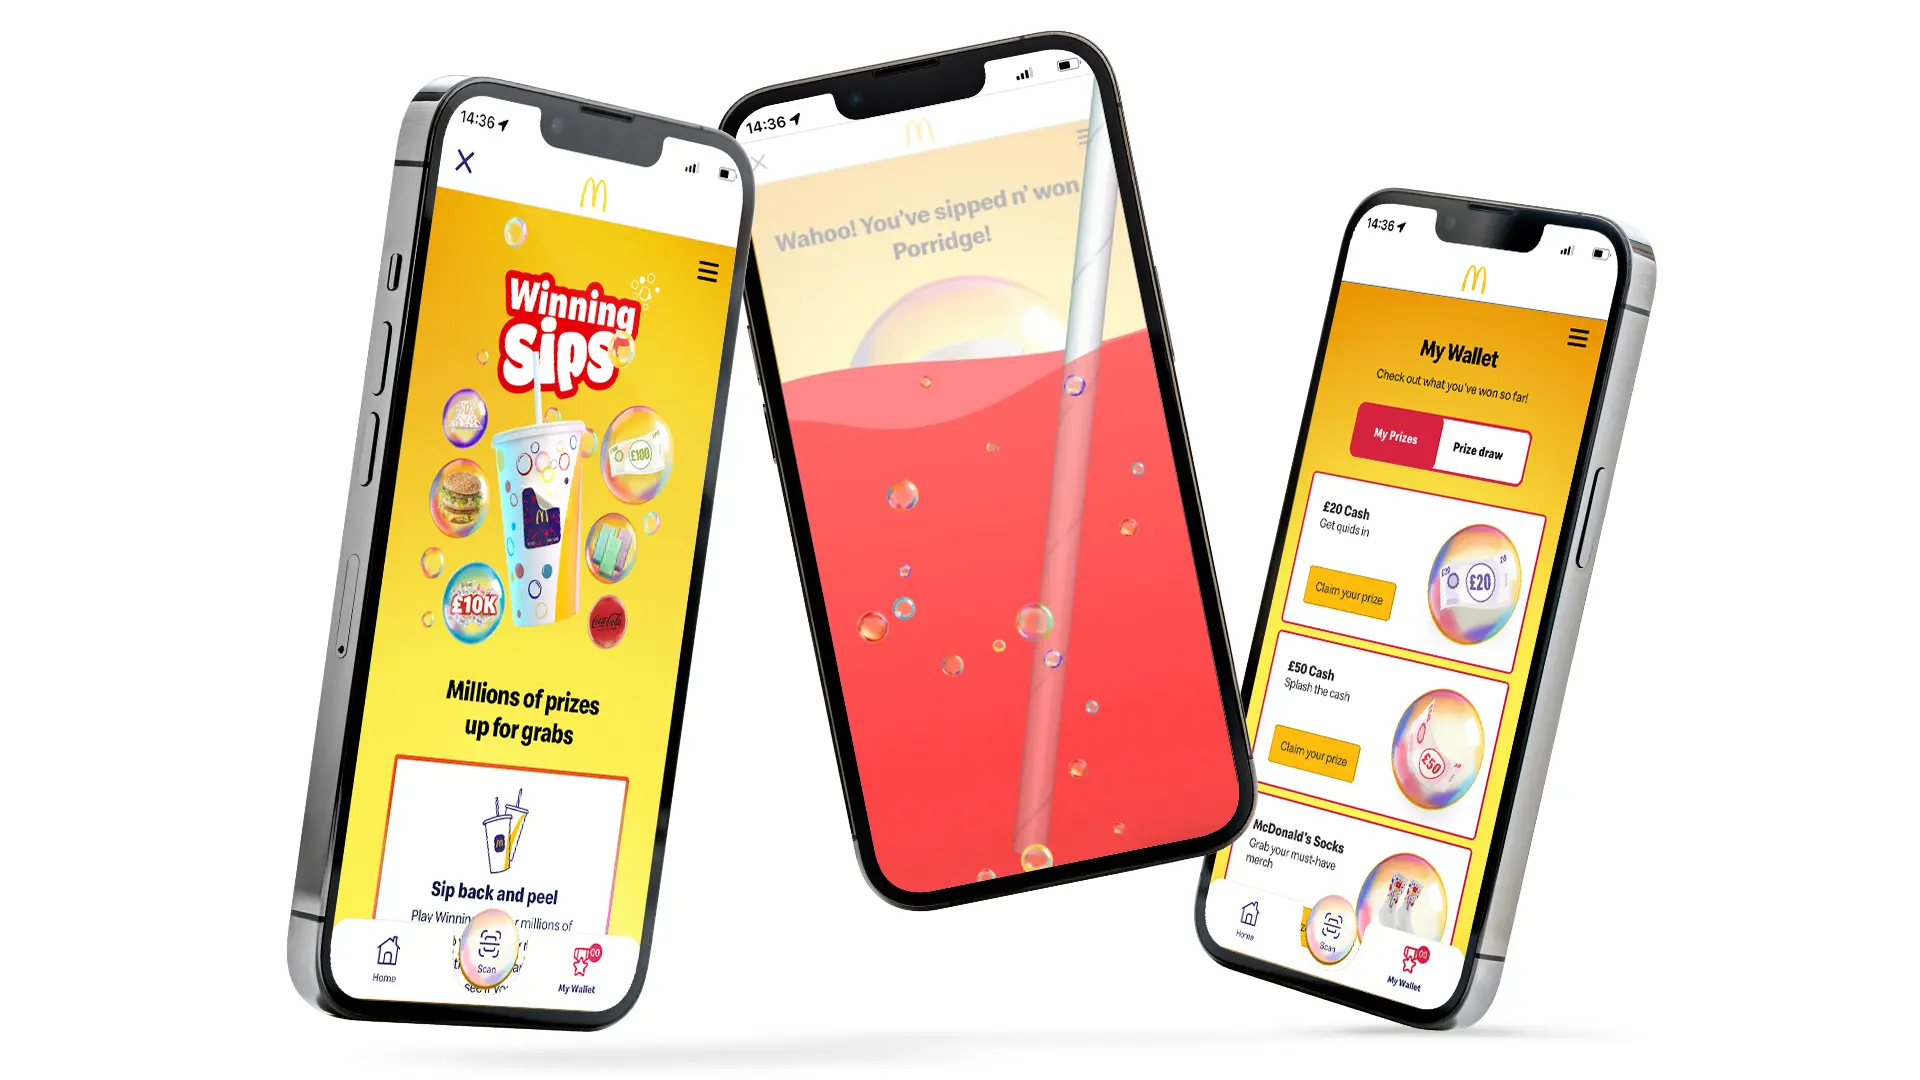 Smartphones showing the Winning Sips campaign